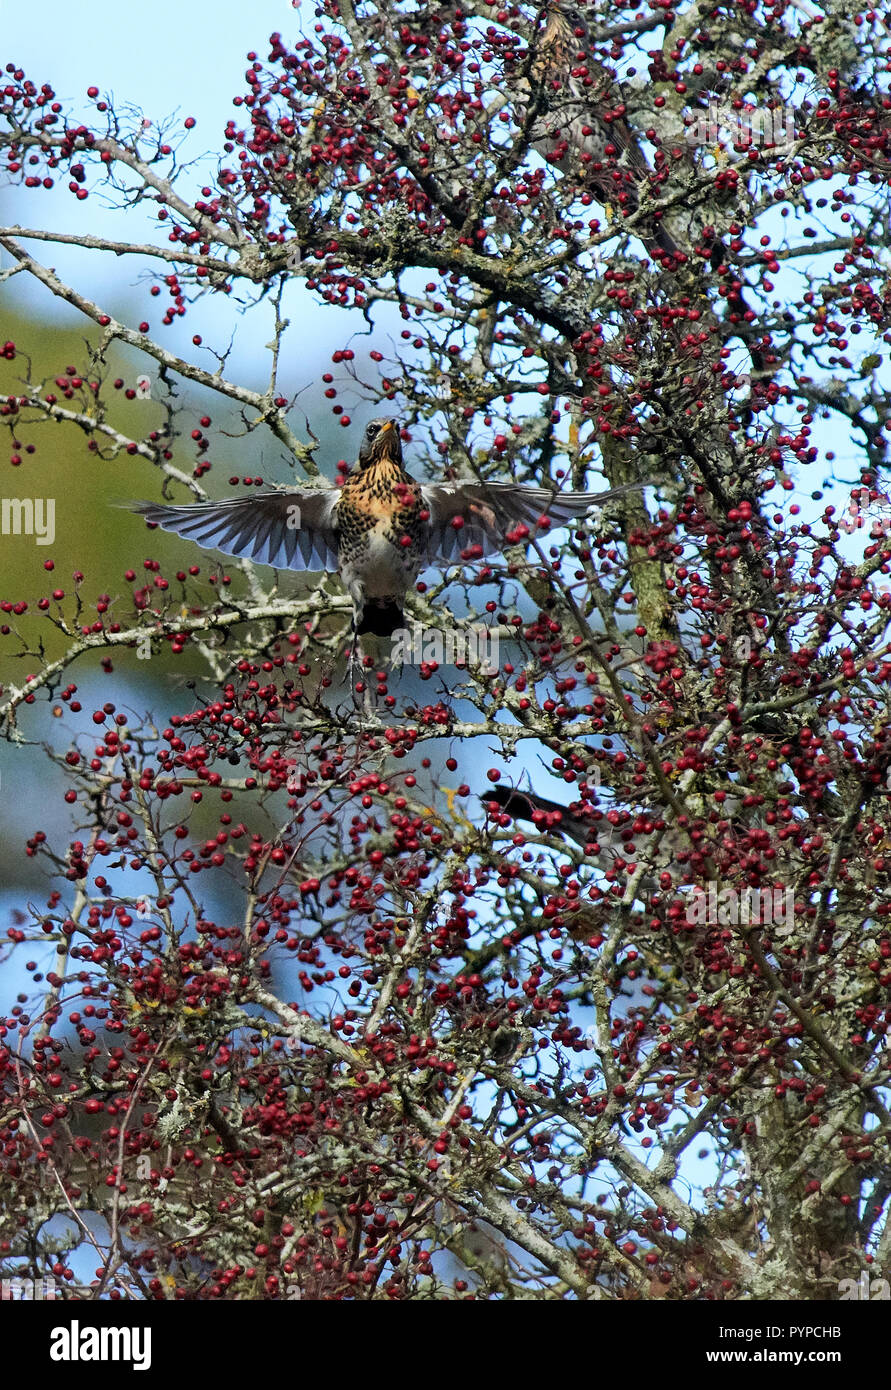 Llanwrthwl, Wales, UK. 29th Oct, 2018. A mixed flock of several thousand migratory Thrushes stop off to feed up on hawthorn berries near the Elan Valley. The flock was made up of Mainly Fieldfare [Turdus pilaris] with some redwing [Turdus iliacus] Credit: Phillip Thomas/Alamy Live News Stock Photo